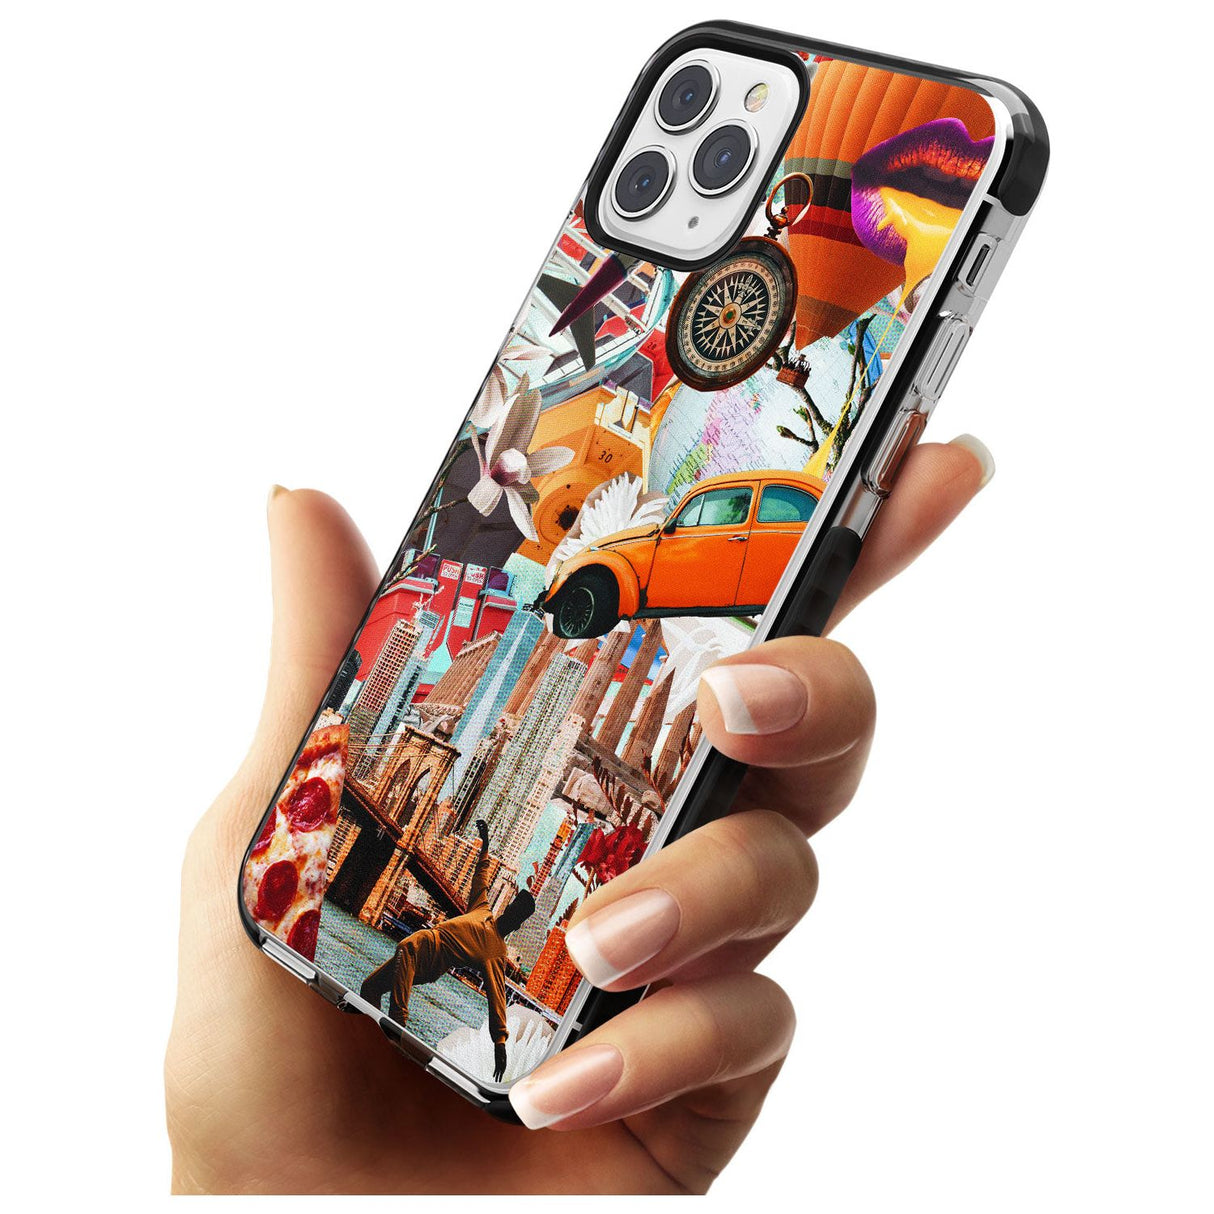 Vintage Collage: New York Mix Black Impact Phone Case for iPhone 11 Pro Max